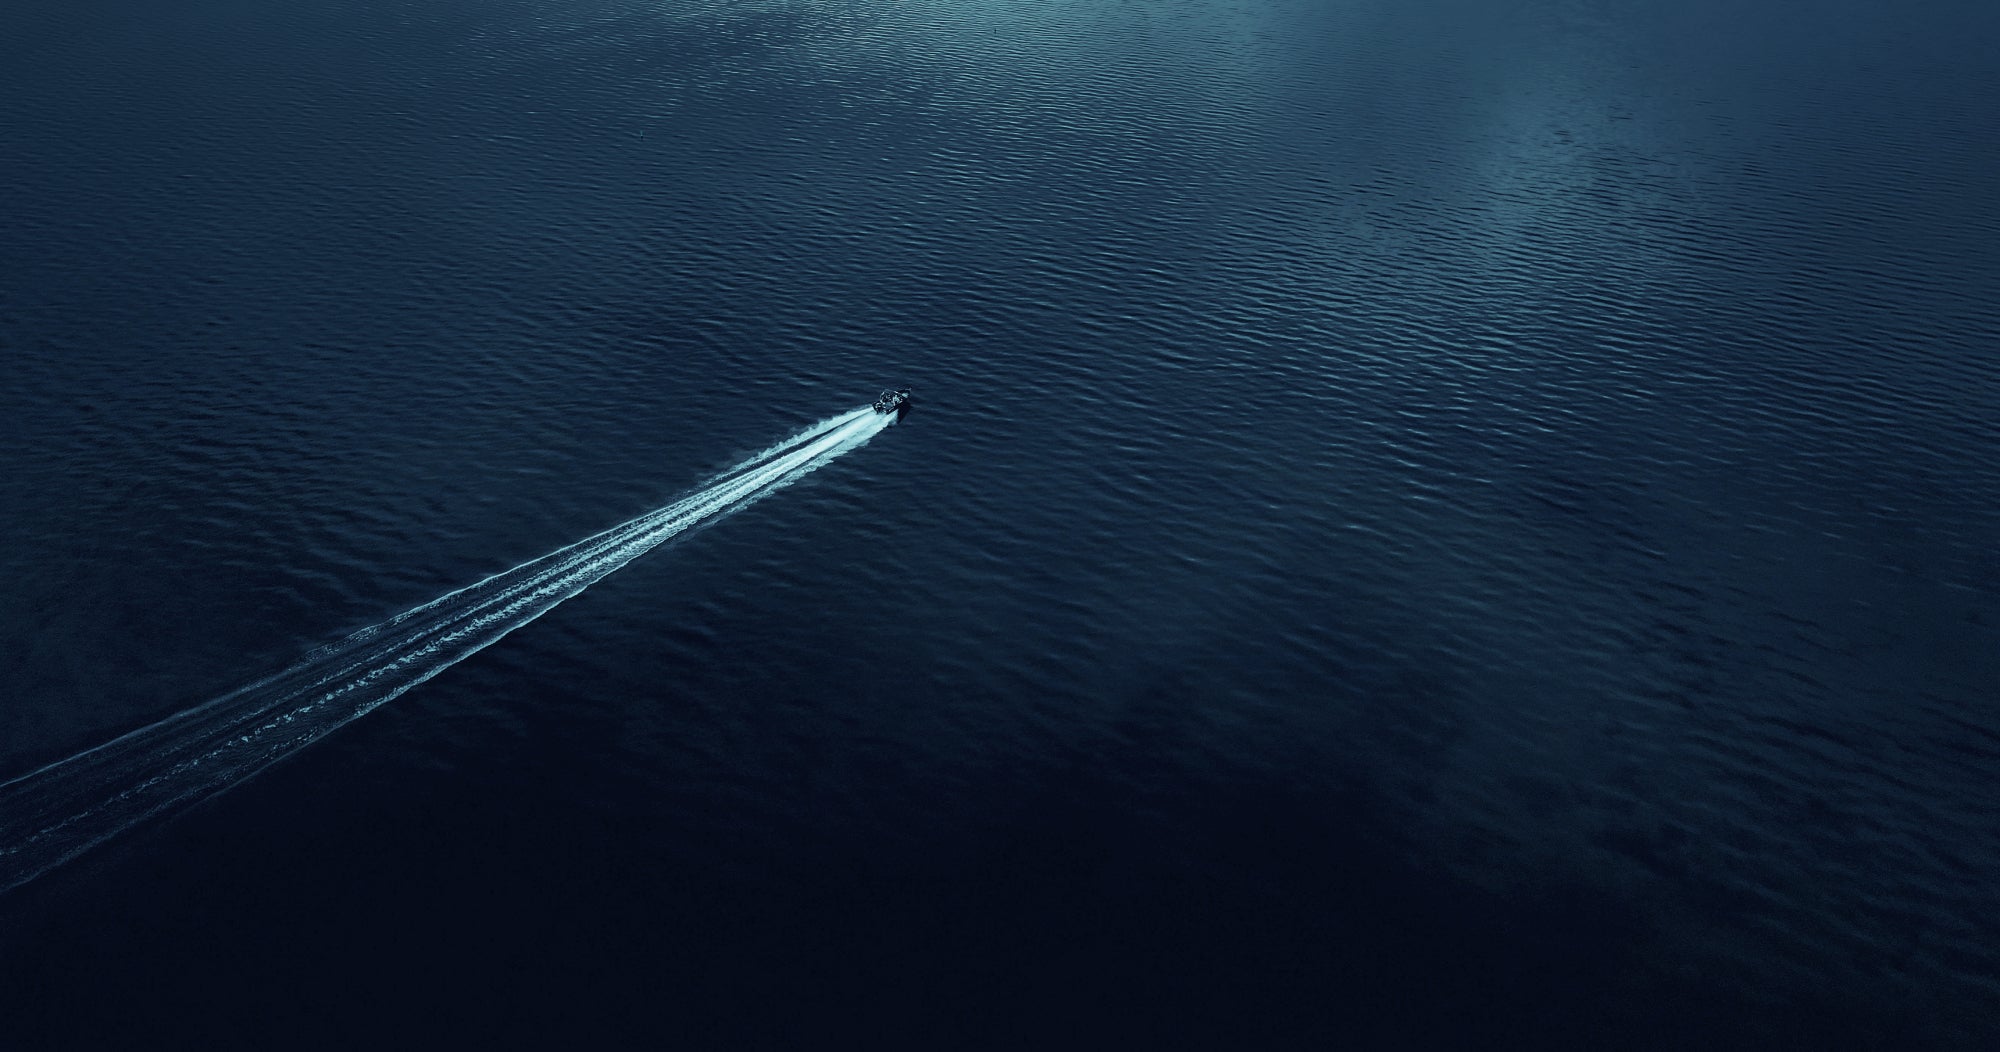 A small boat glides across the lake at high speed, seen from above.